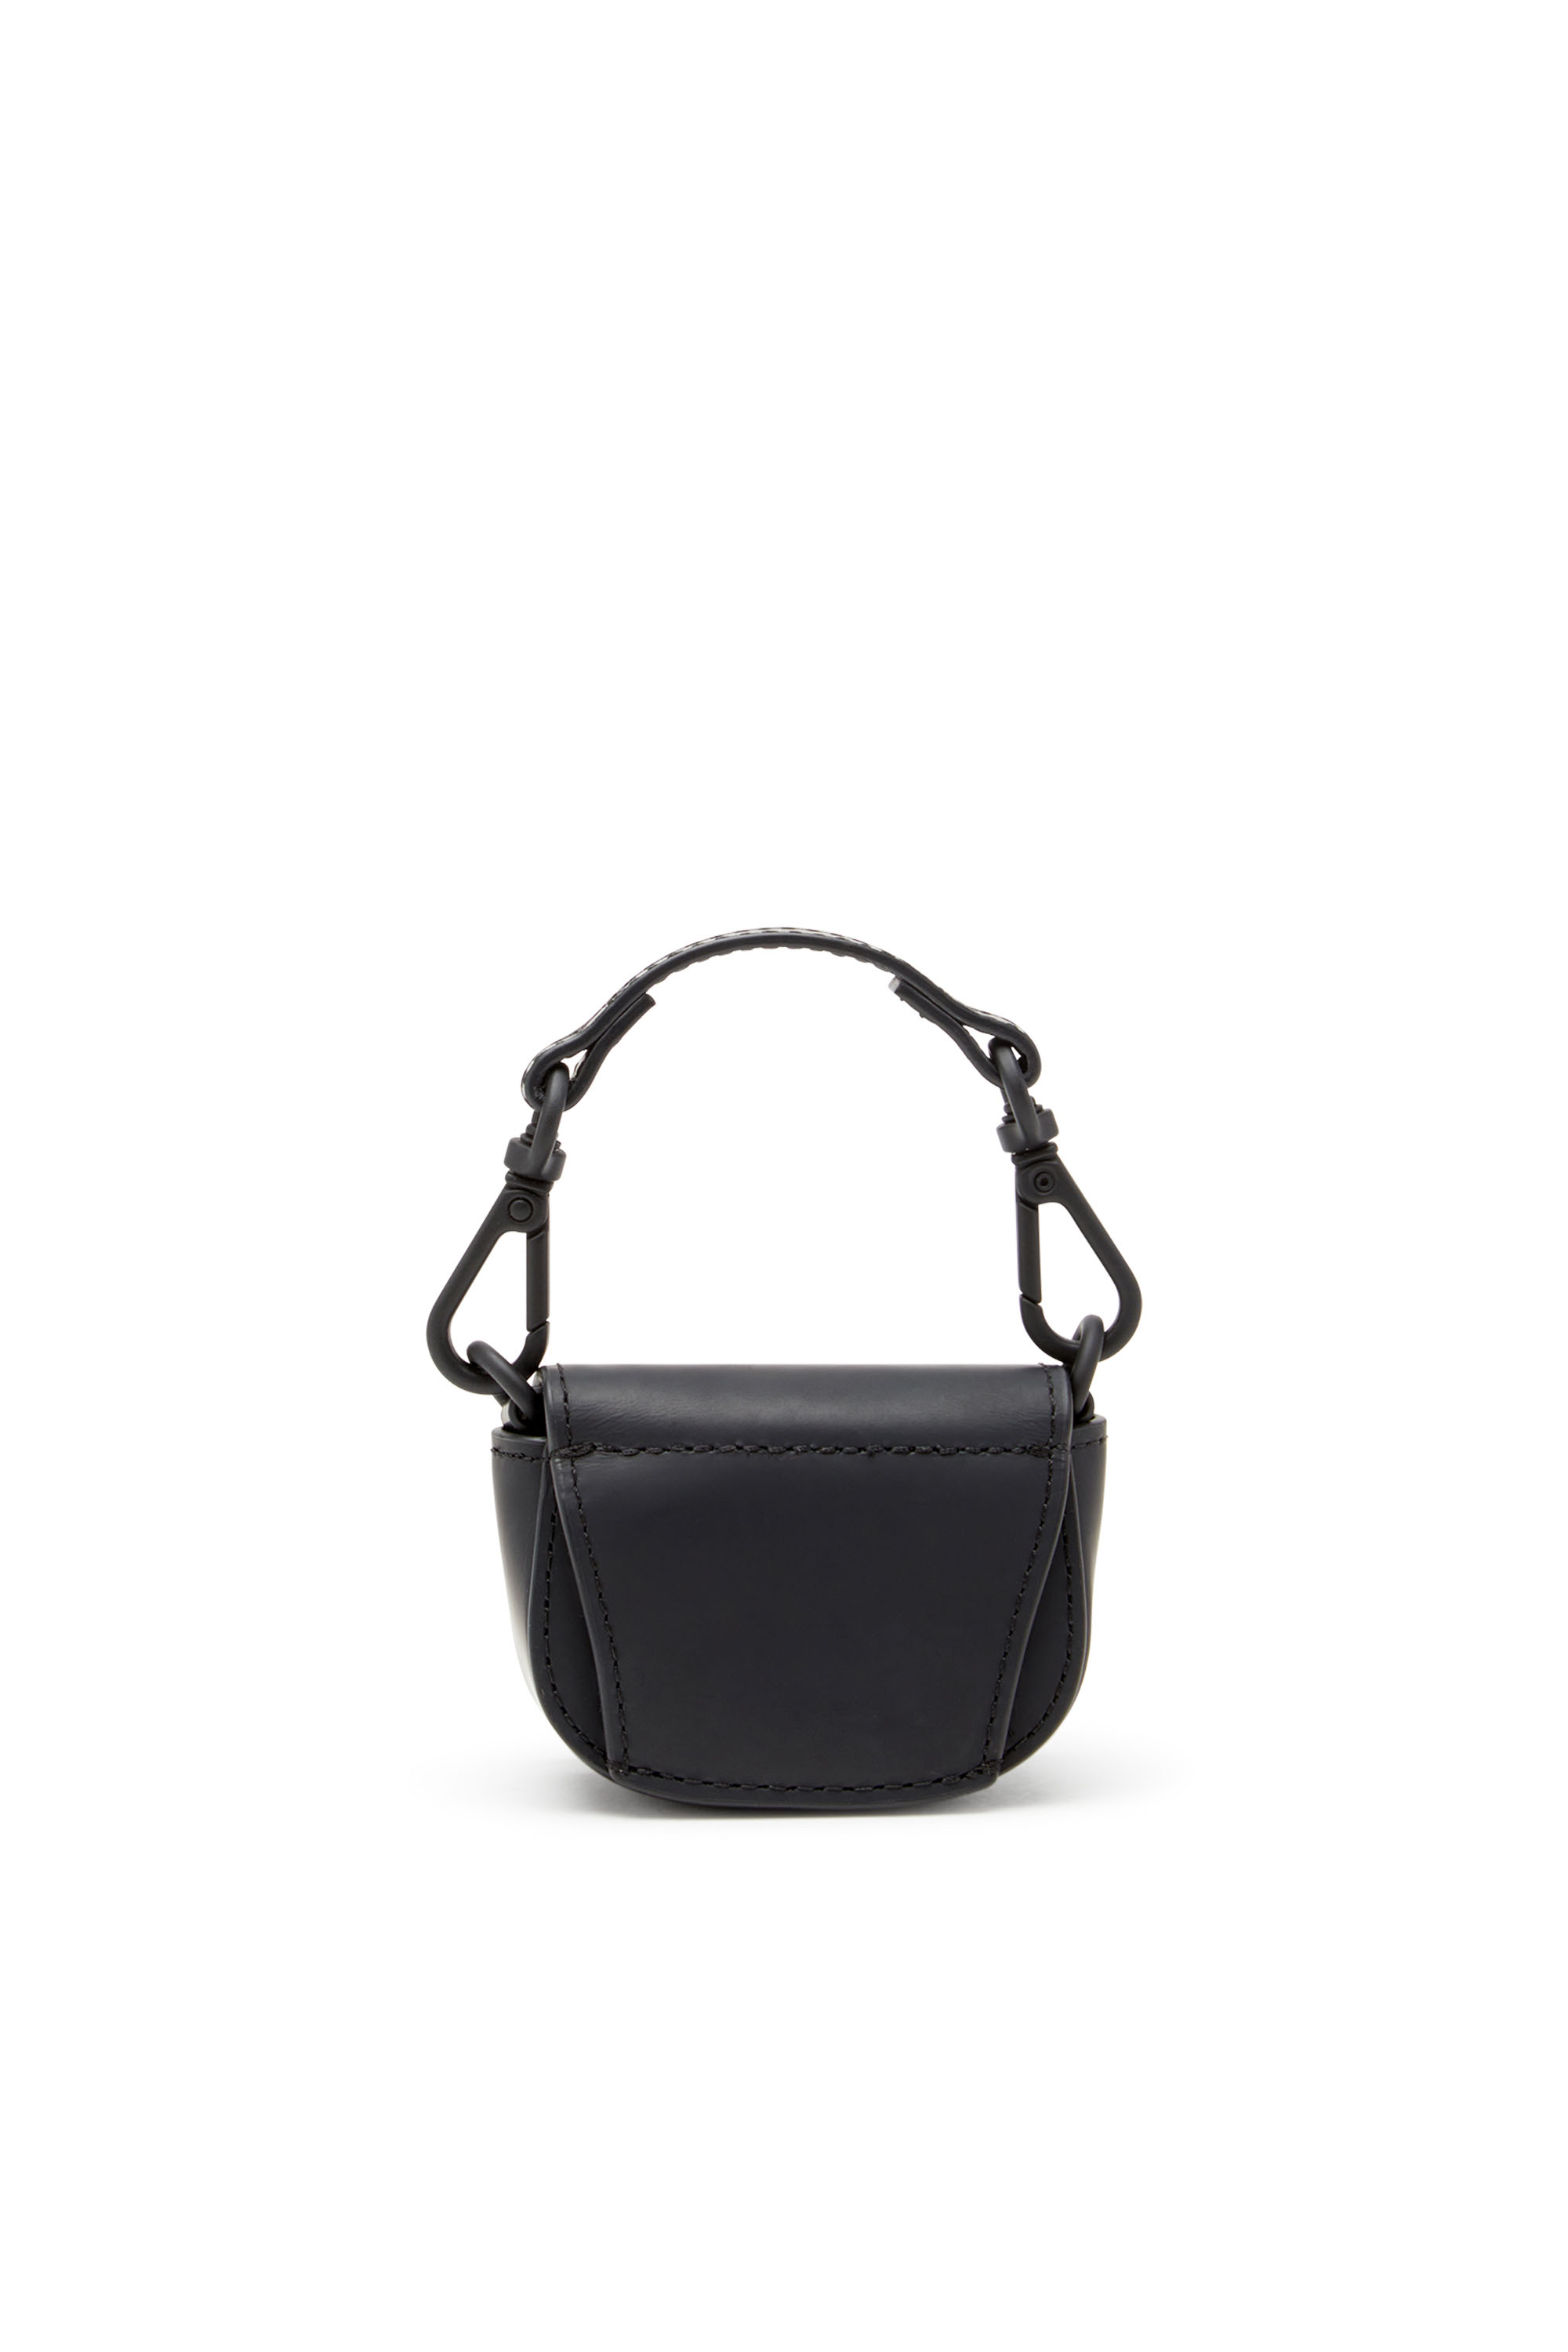 Diesel - 1DR XXS CHAIN, Female Iconic micro bag charm in matte leather in ブラック - Image 2